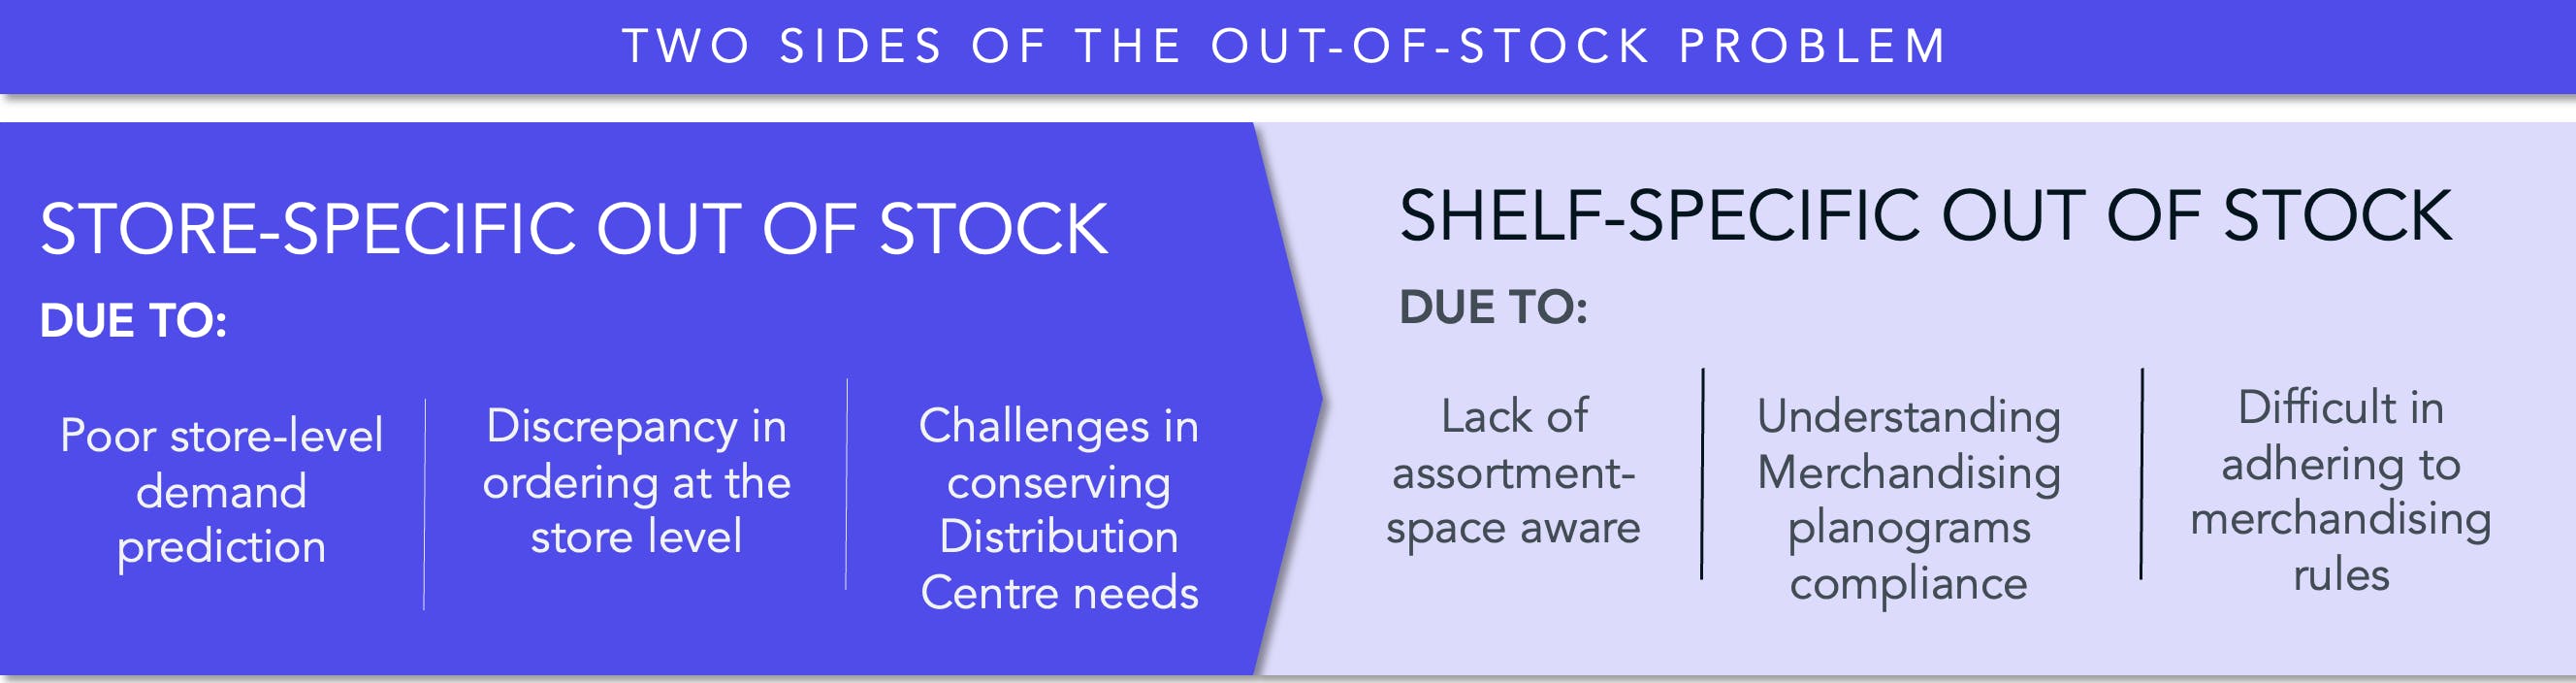 Deconstructing the Out-of-Stock Problem